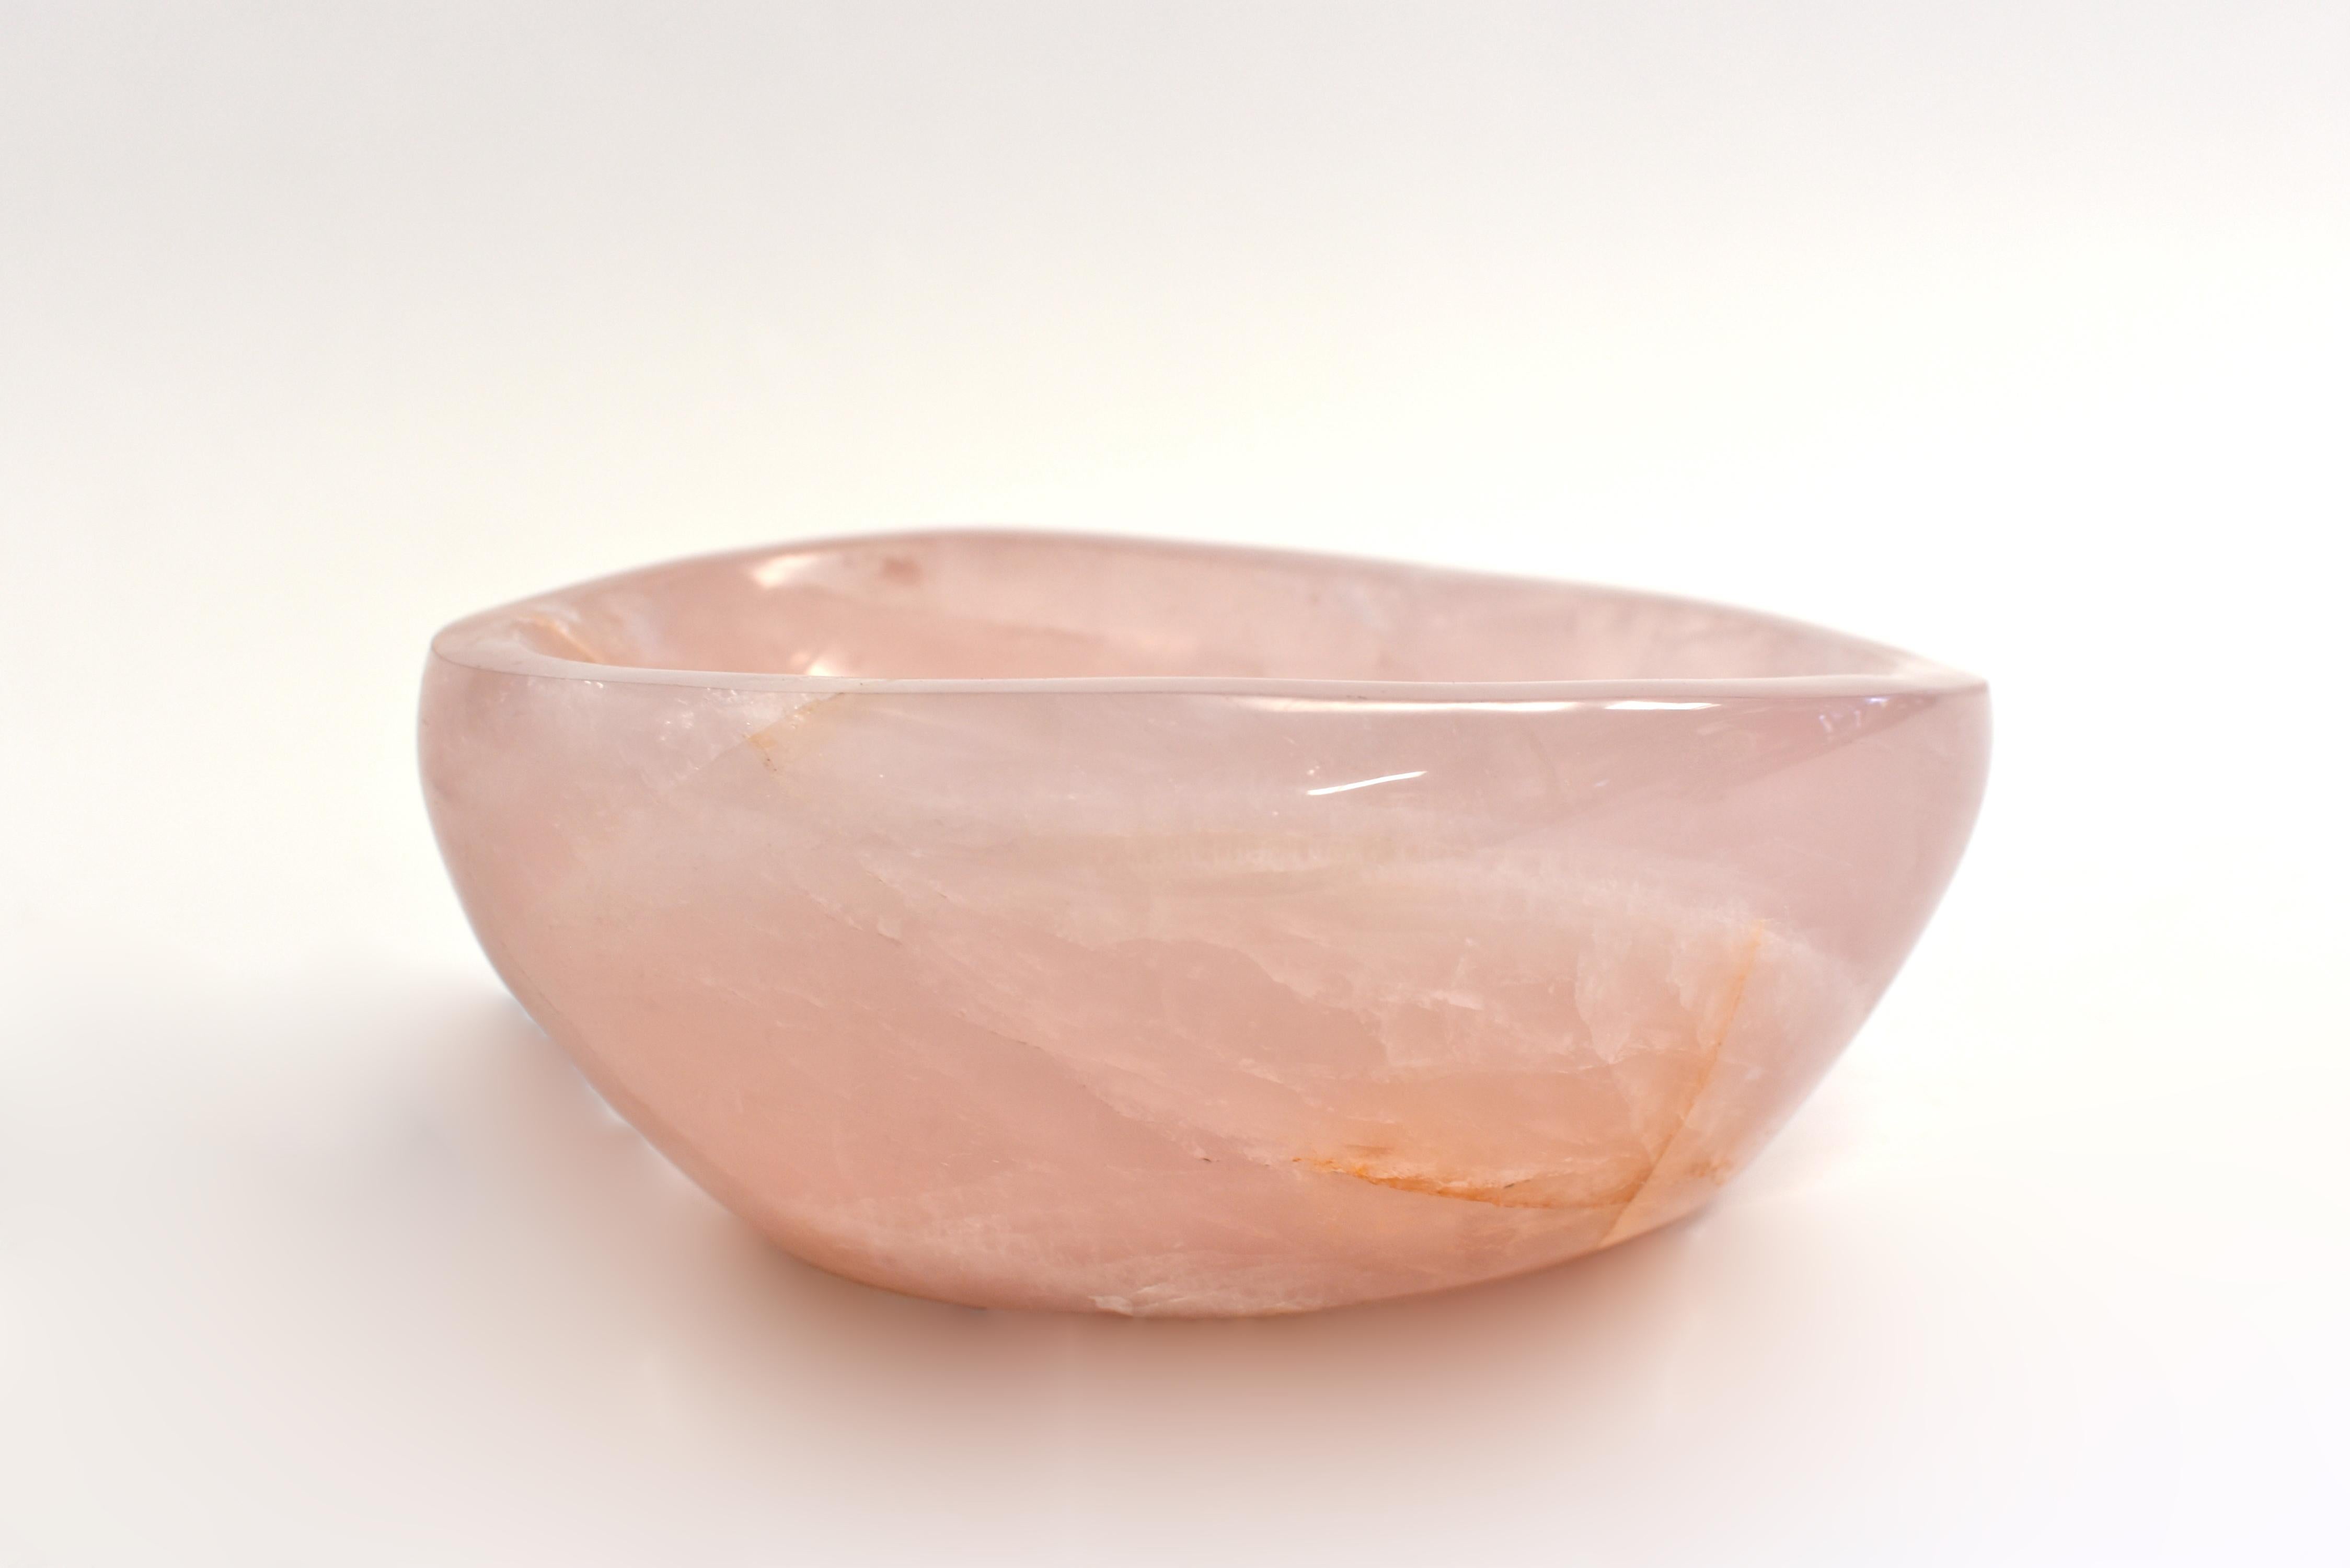 A beautiful large rose quartz bowl weighing 6.15 lbs. Of ovoid form with smooth edge and polished inside out, stone of the highest quality grade AAA rose quartz. All natural gemstone, hand crafted and polished. Stunning color and iridescence. Rose